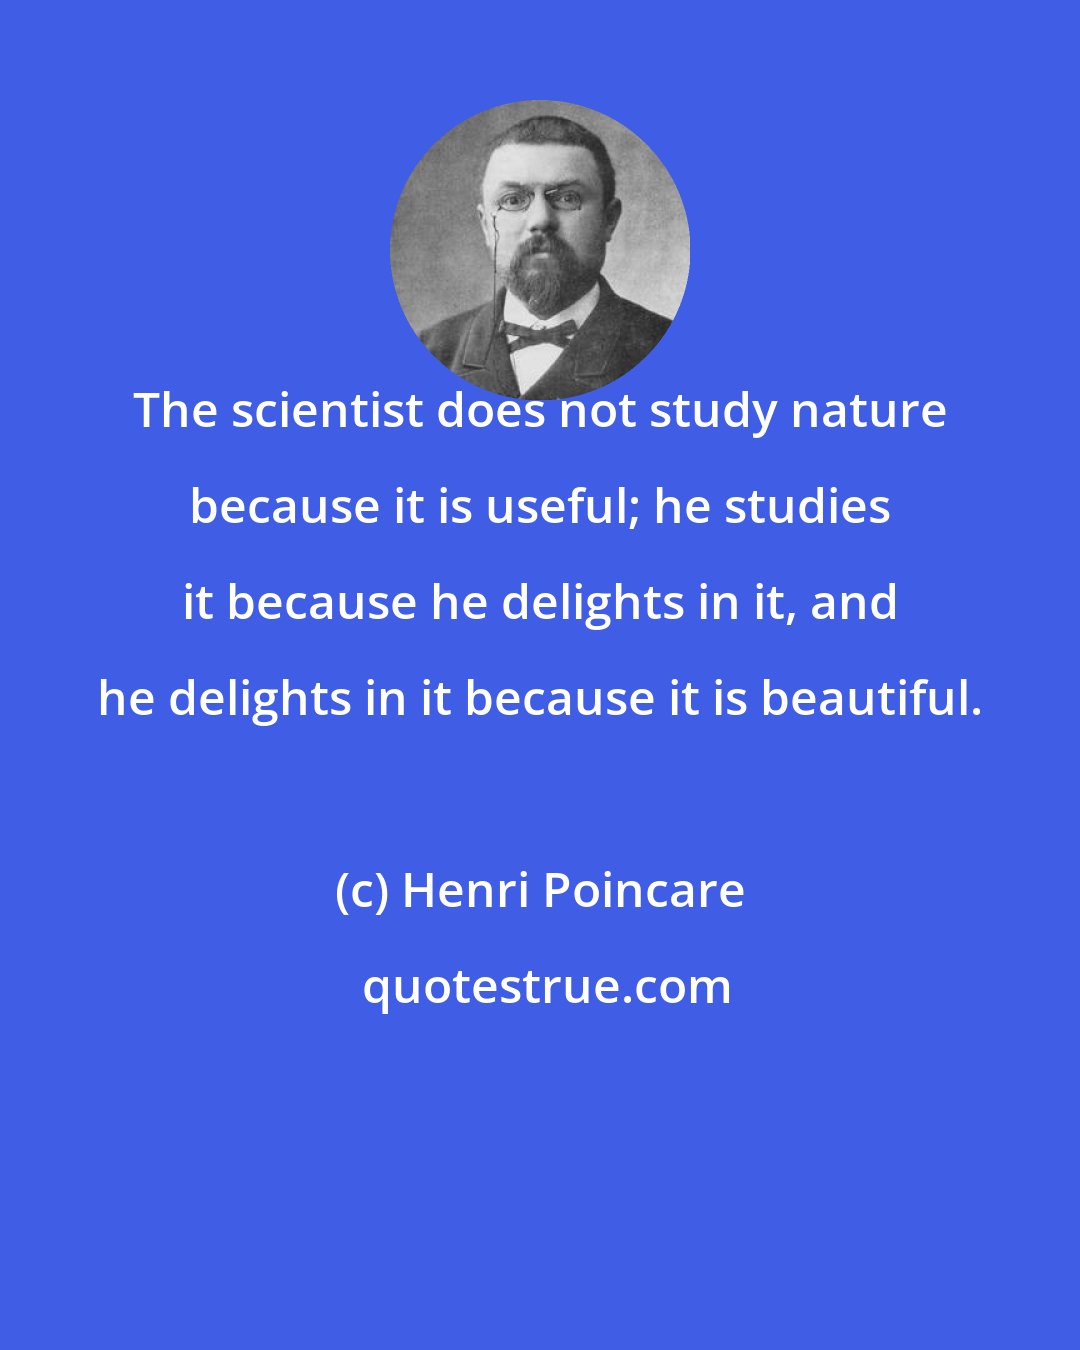 Henri Poincare: The scientist does not study nature because it is useful; he studies it because he delights in it, and he delights in it because it is beautiful.